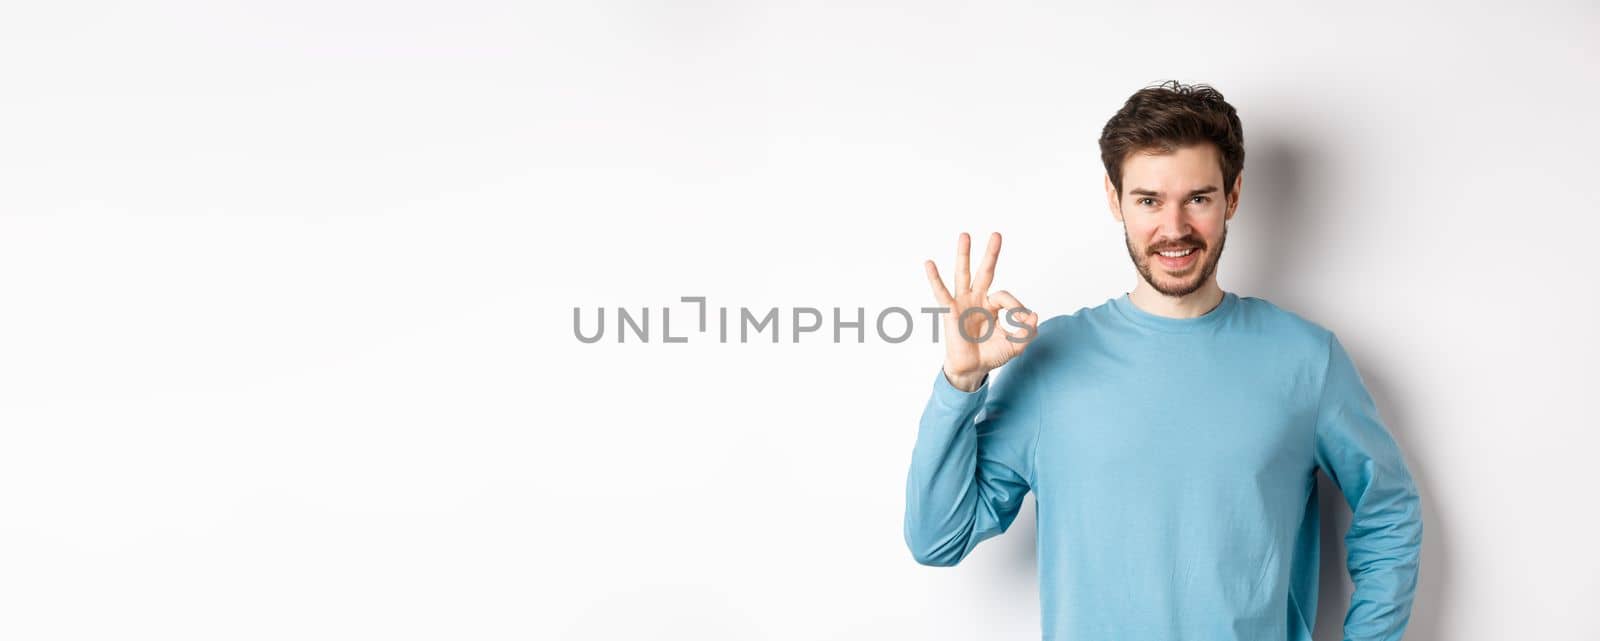 Okay. Handsome smiling man showing ok sign and looking confident, recommend or praise something good, standing over white background.